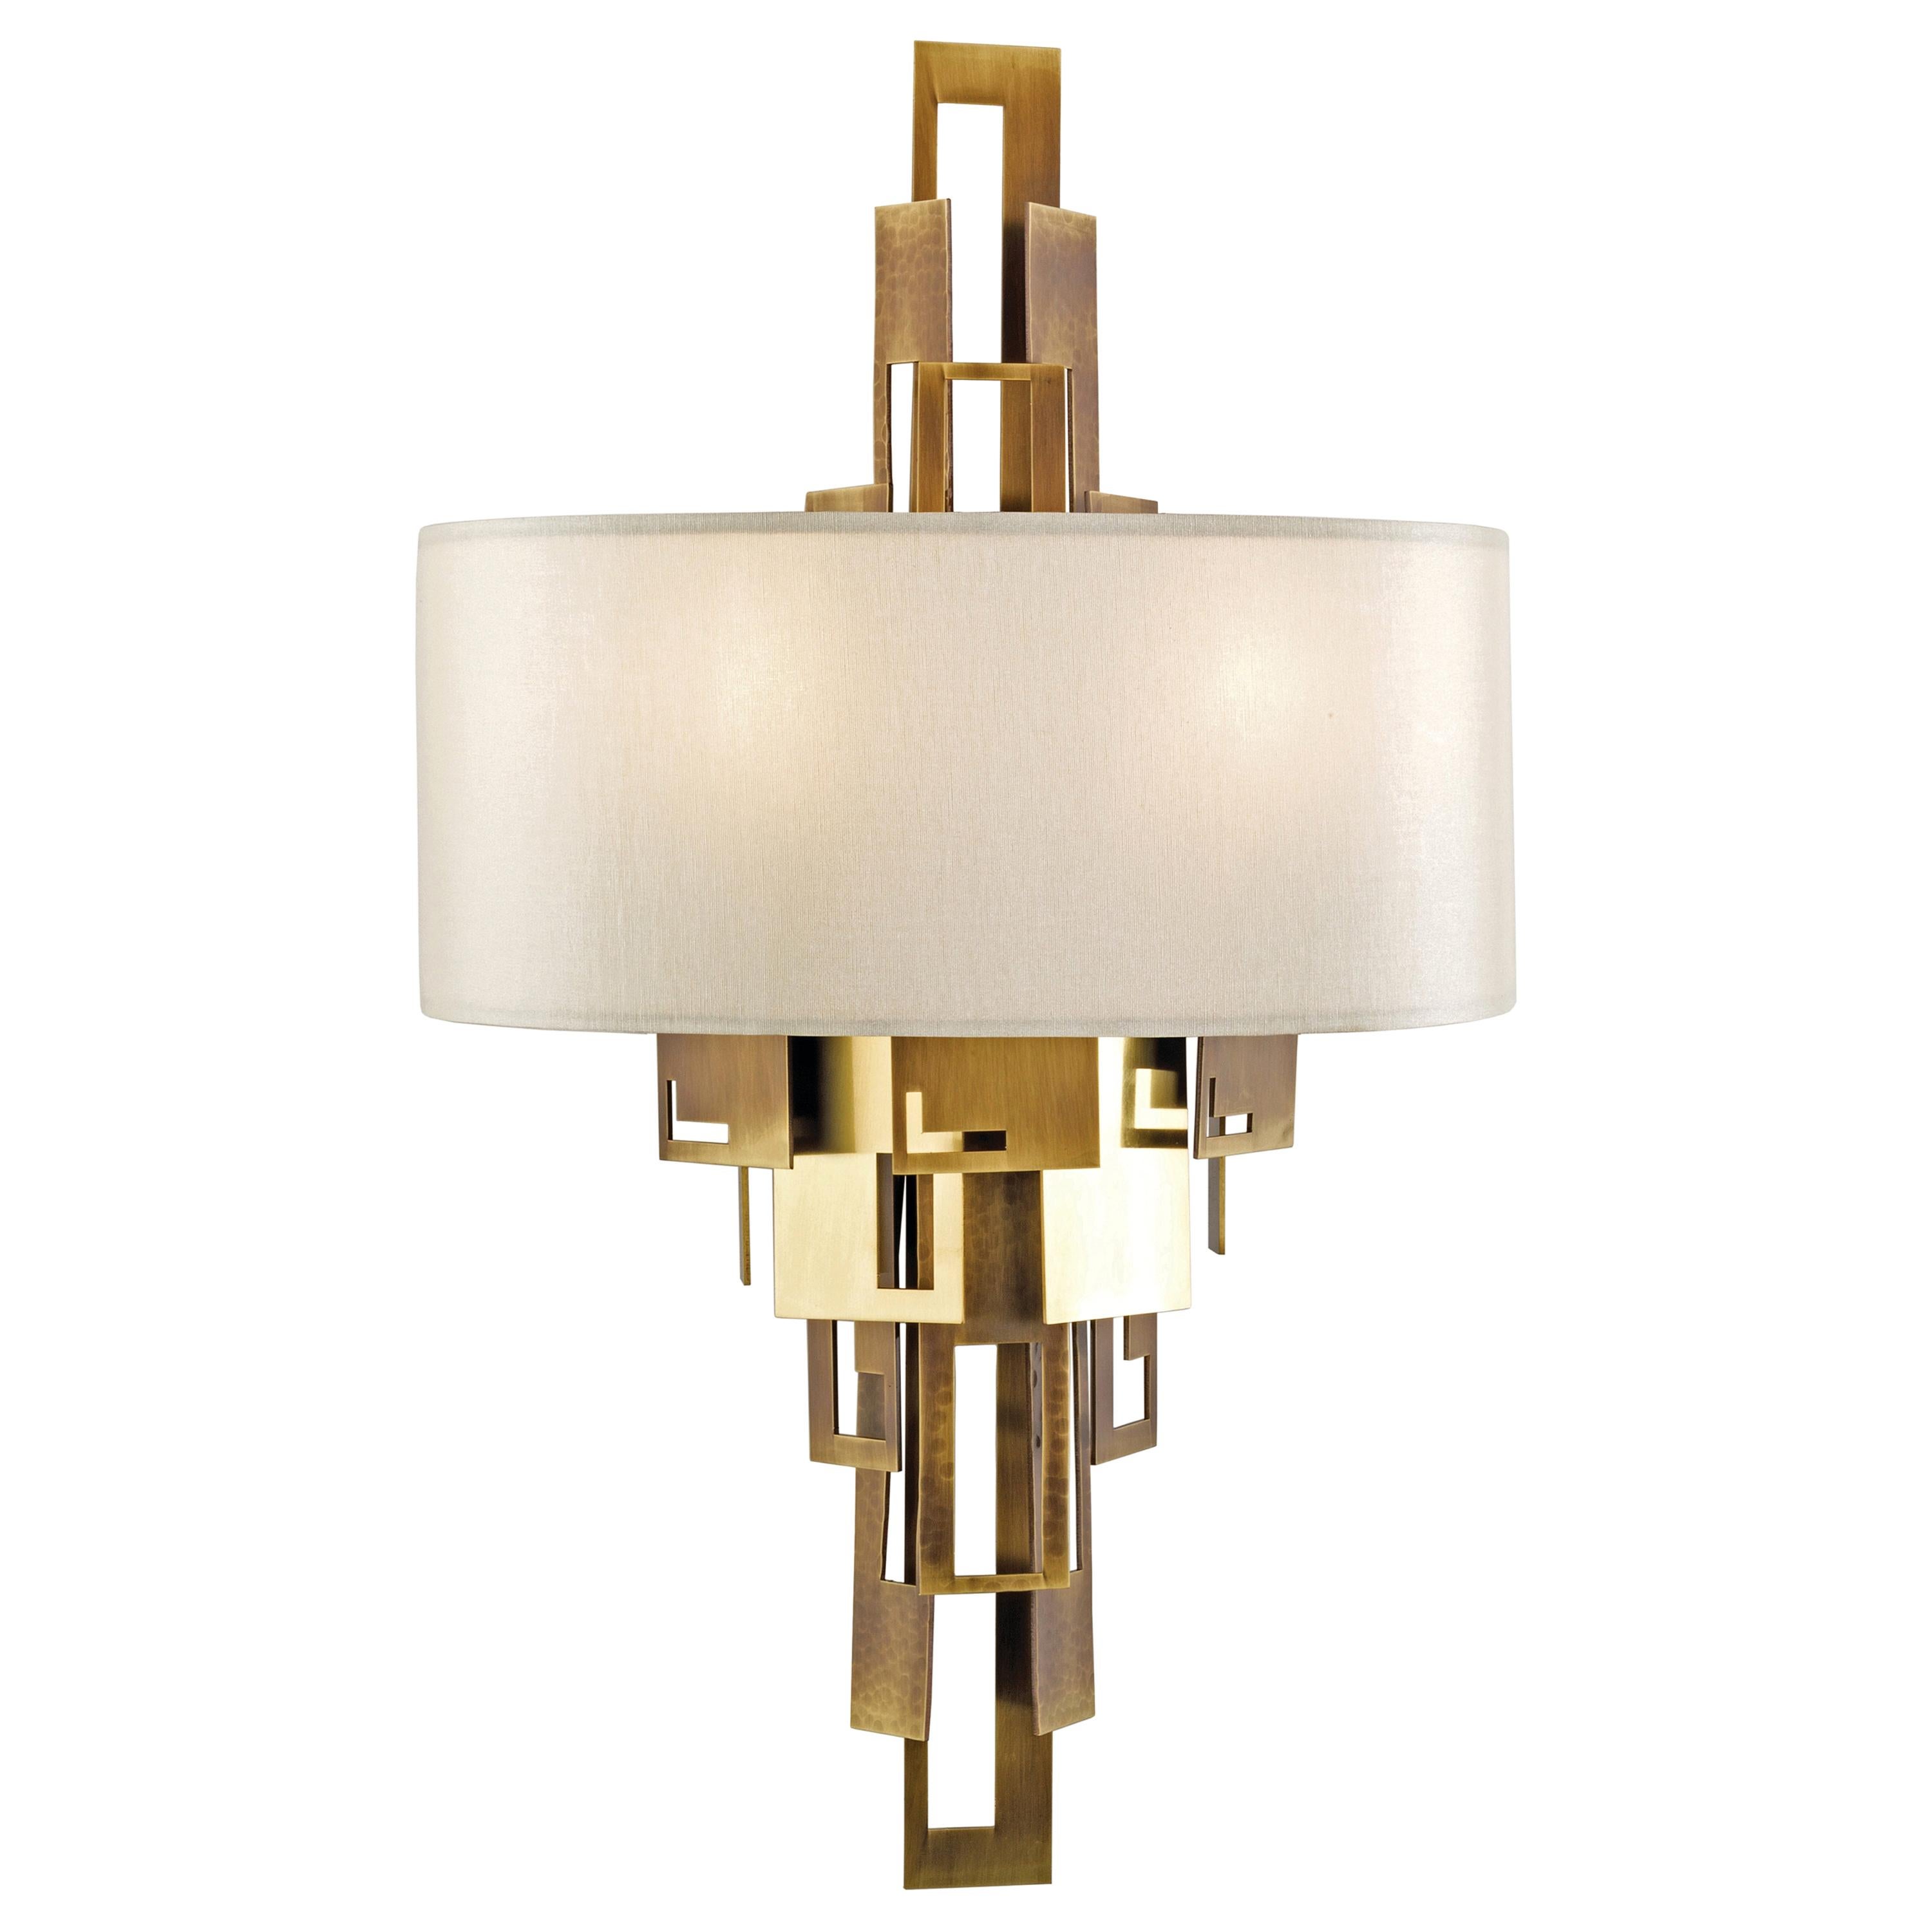 Applique GLAM 721-BB-11 by OFFICINA LUCE